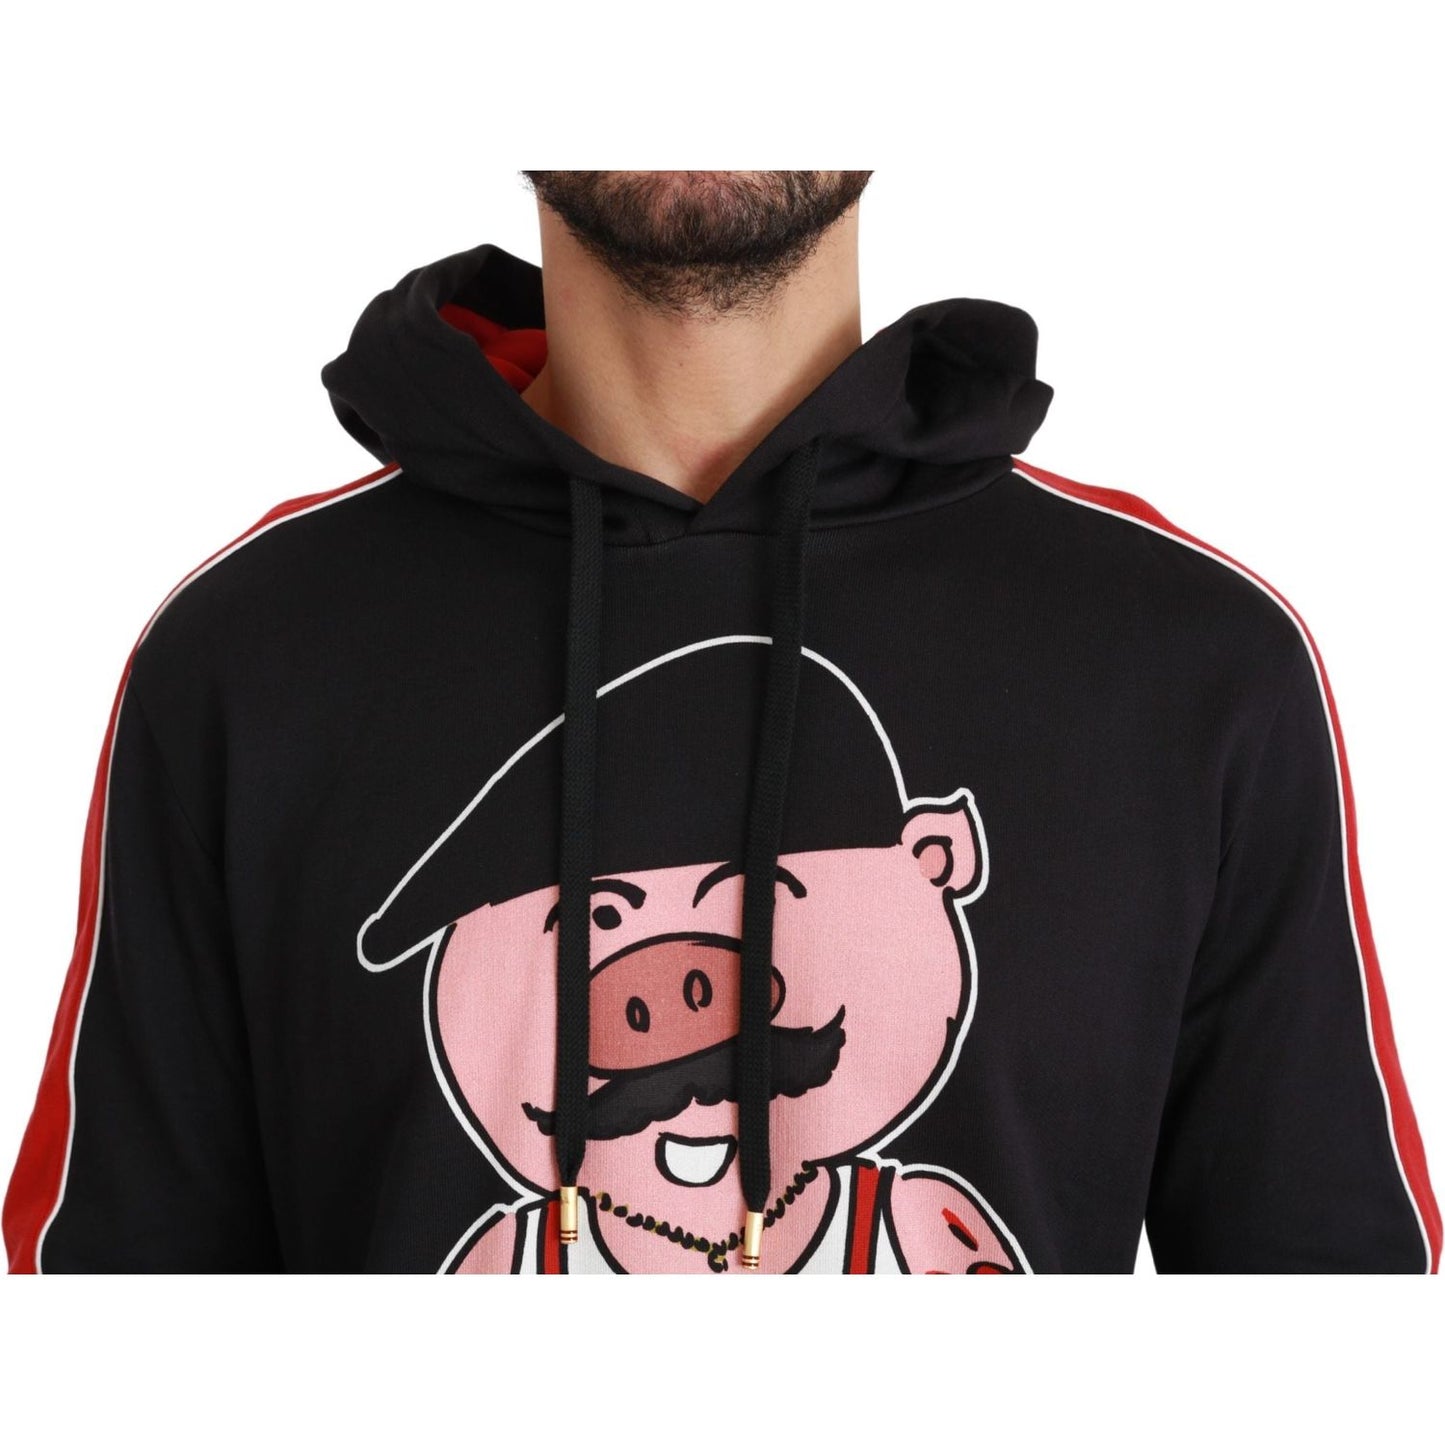 Dolce & Gabbana Elegant Black Hooded Sweater with Multicolor Motif black-pig-of-the-year-hooded-sweater 34-scaled-0ddedca2-014.jpg